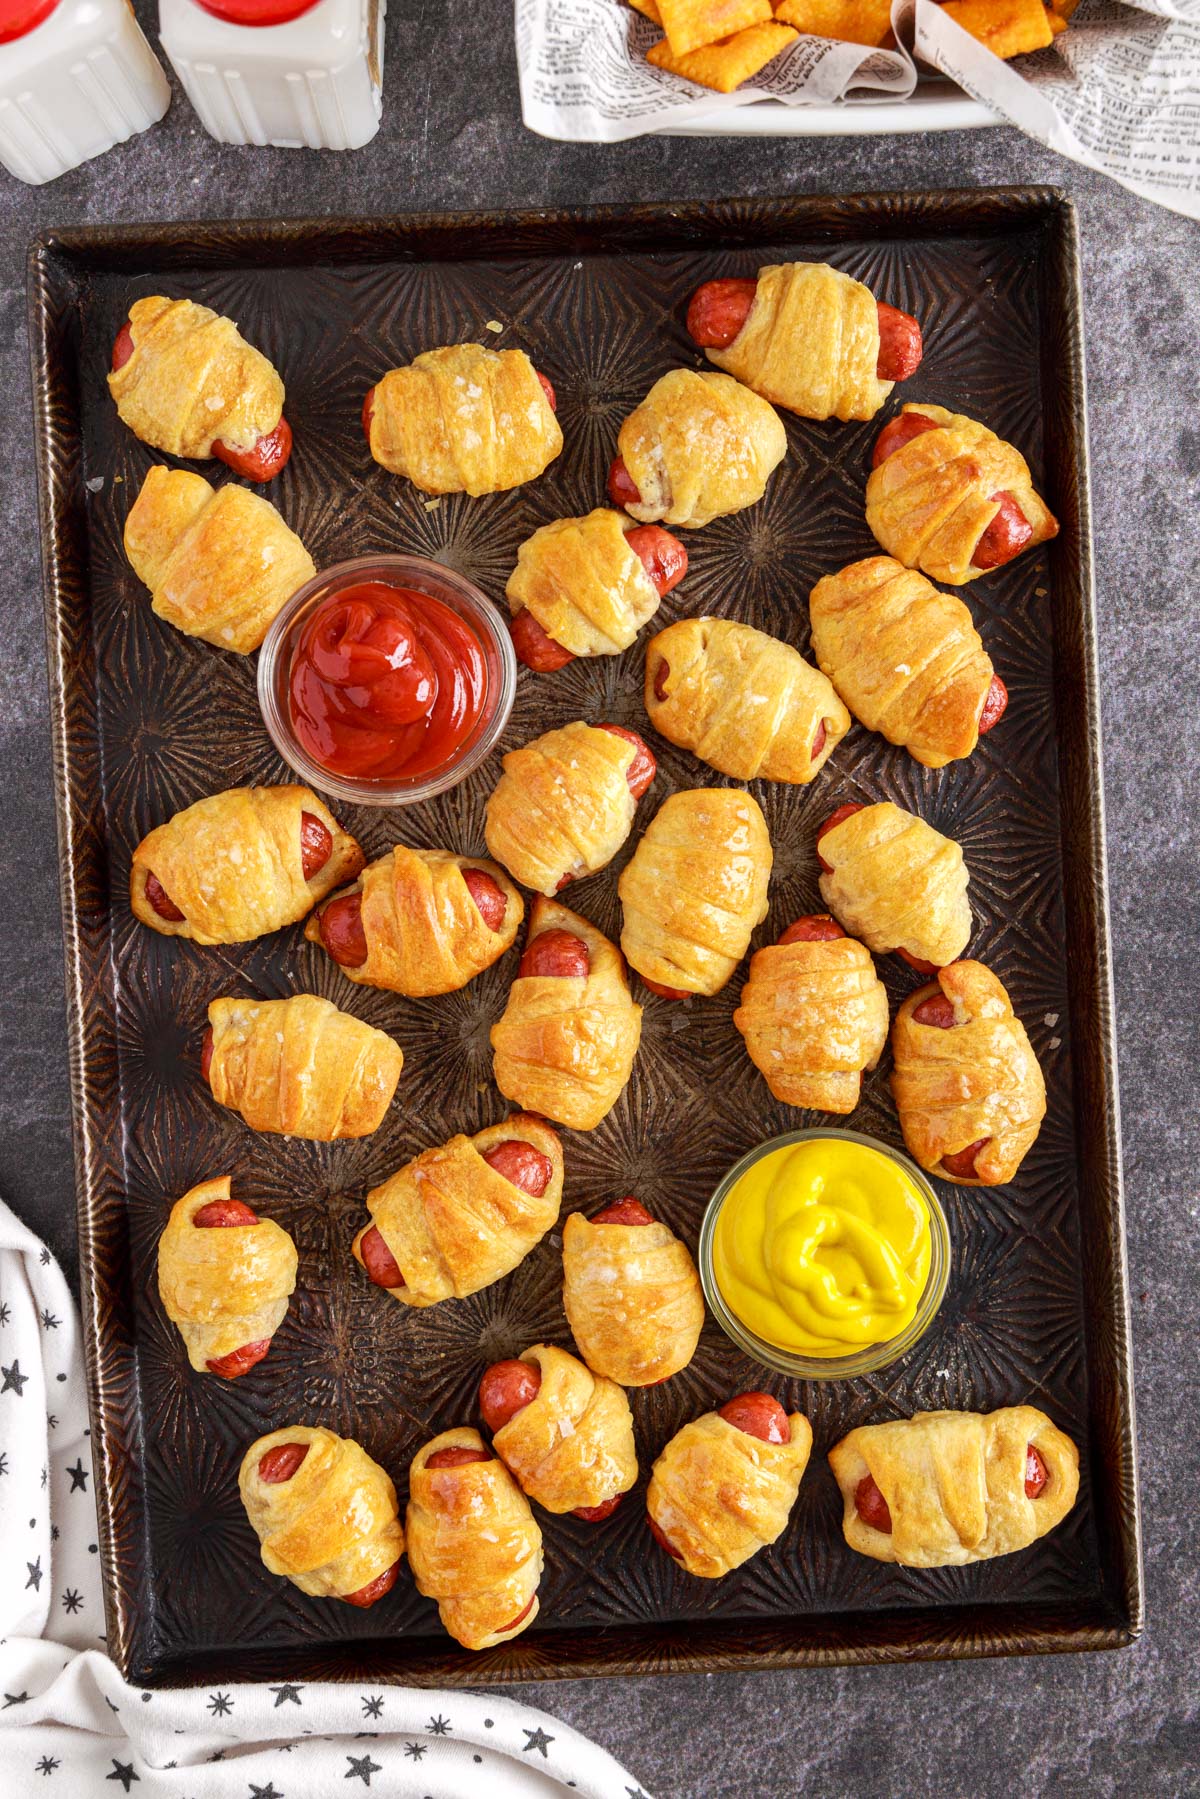 cookie sheet full of lil smokies pigs in a blanket with ketchup and mustard on a cookie sheet